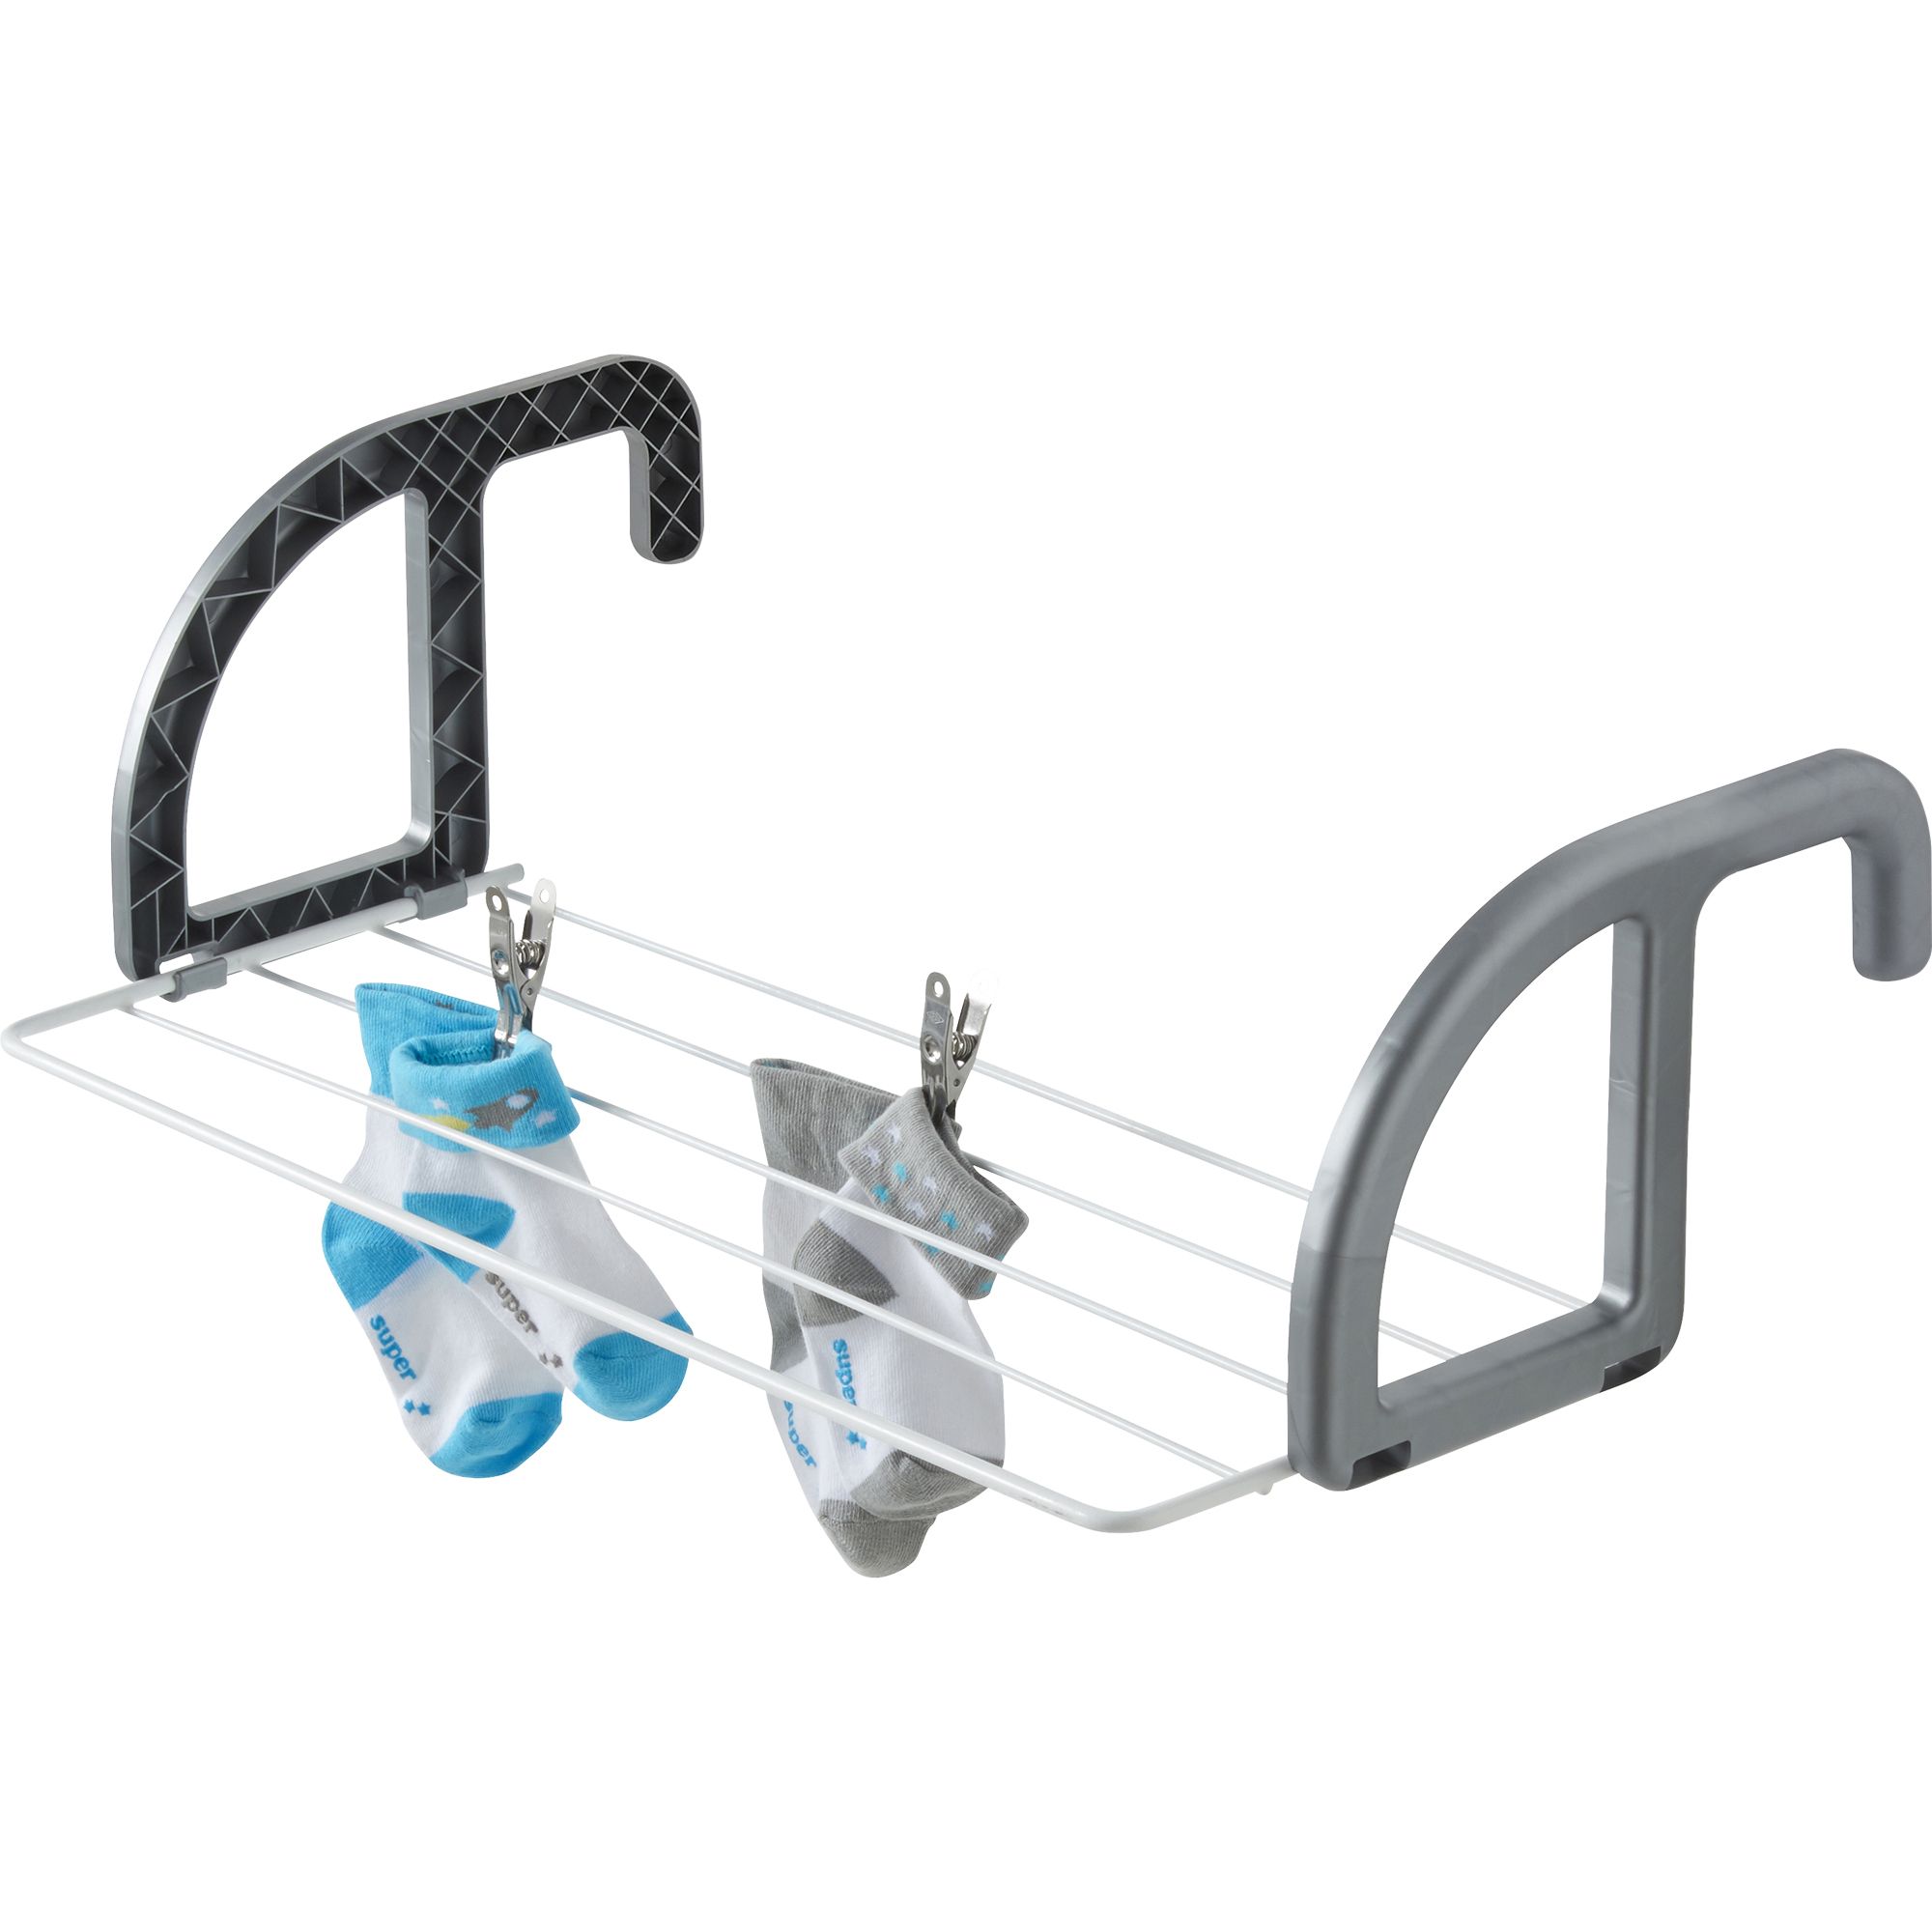 GoodHome Grey & white Foldable Laundry Airer, 2.5m